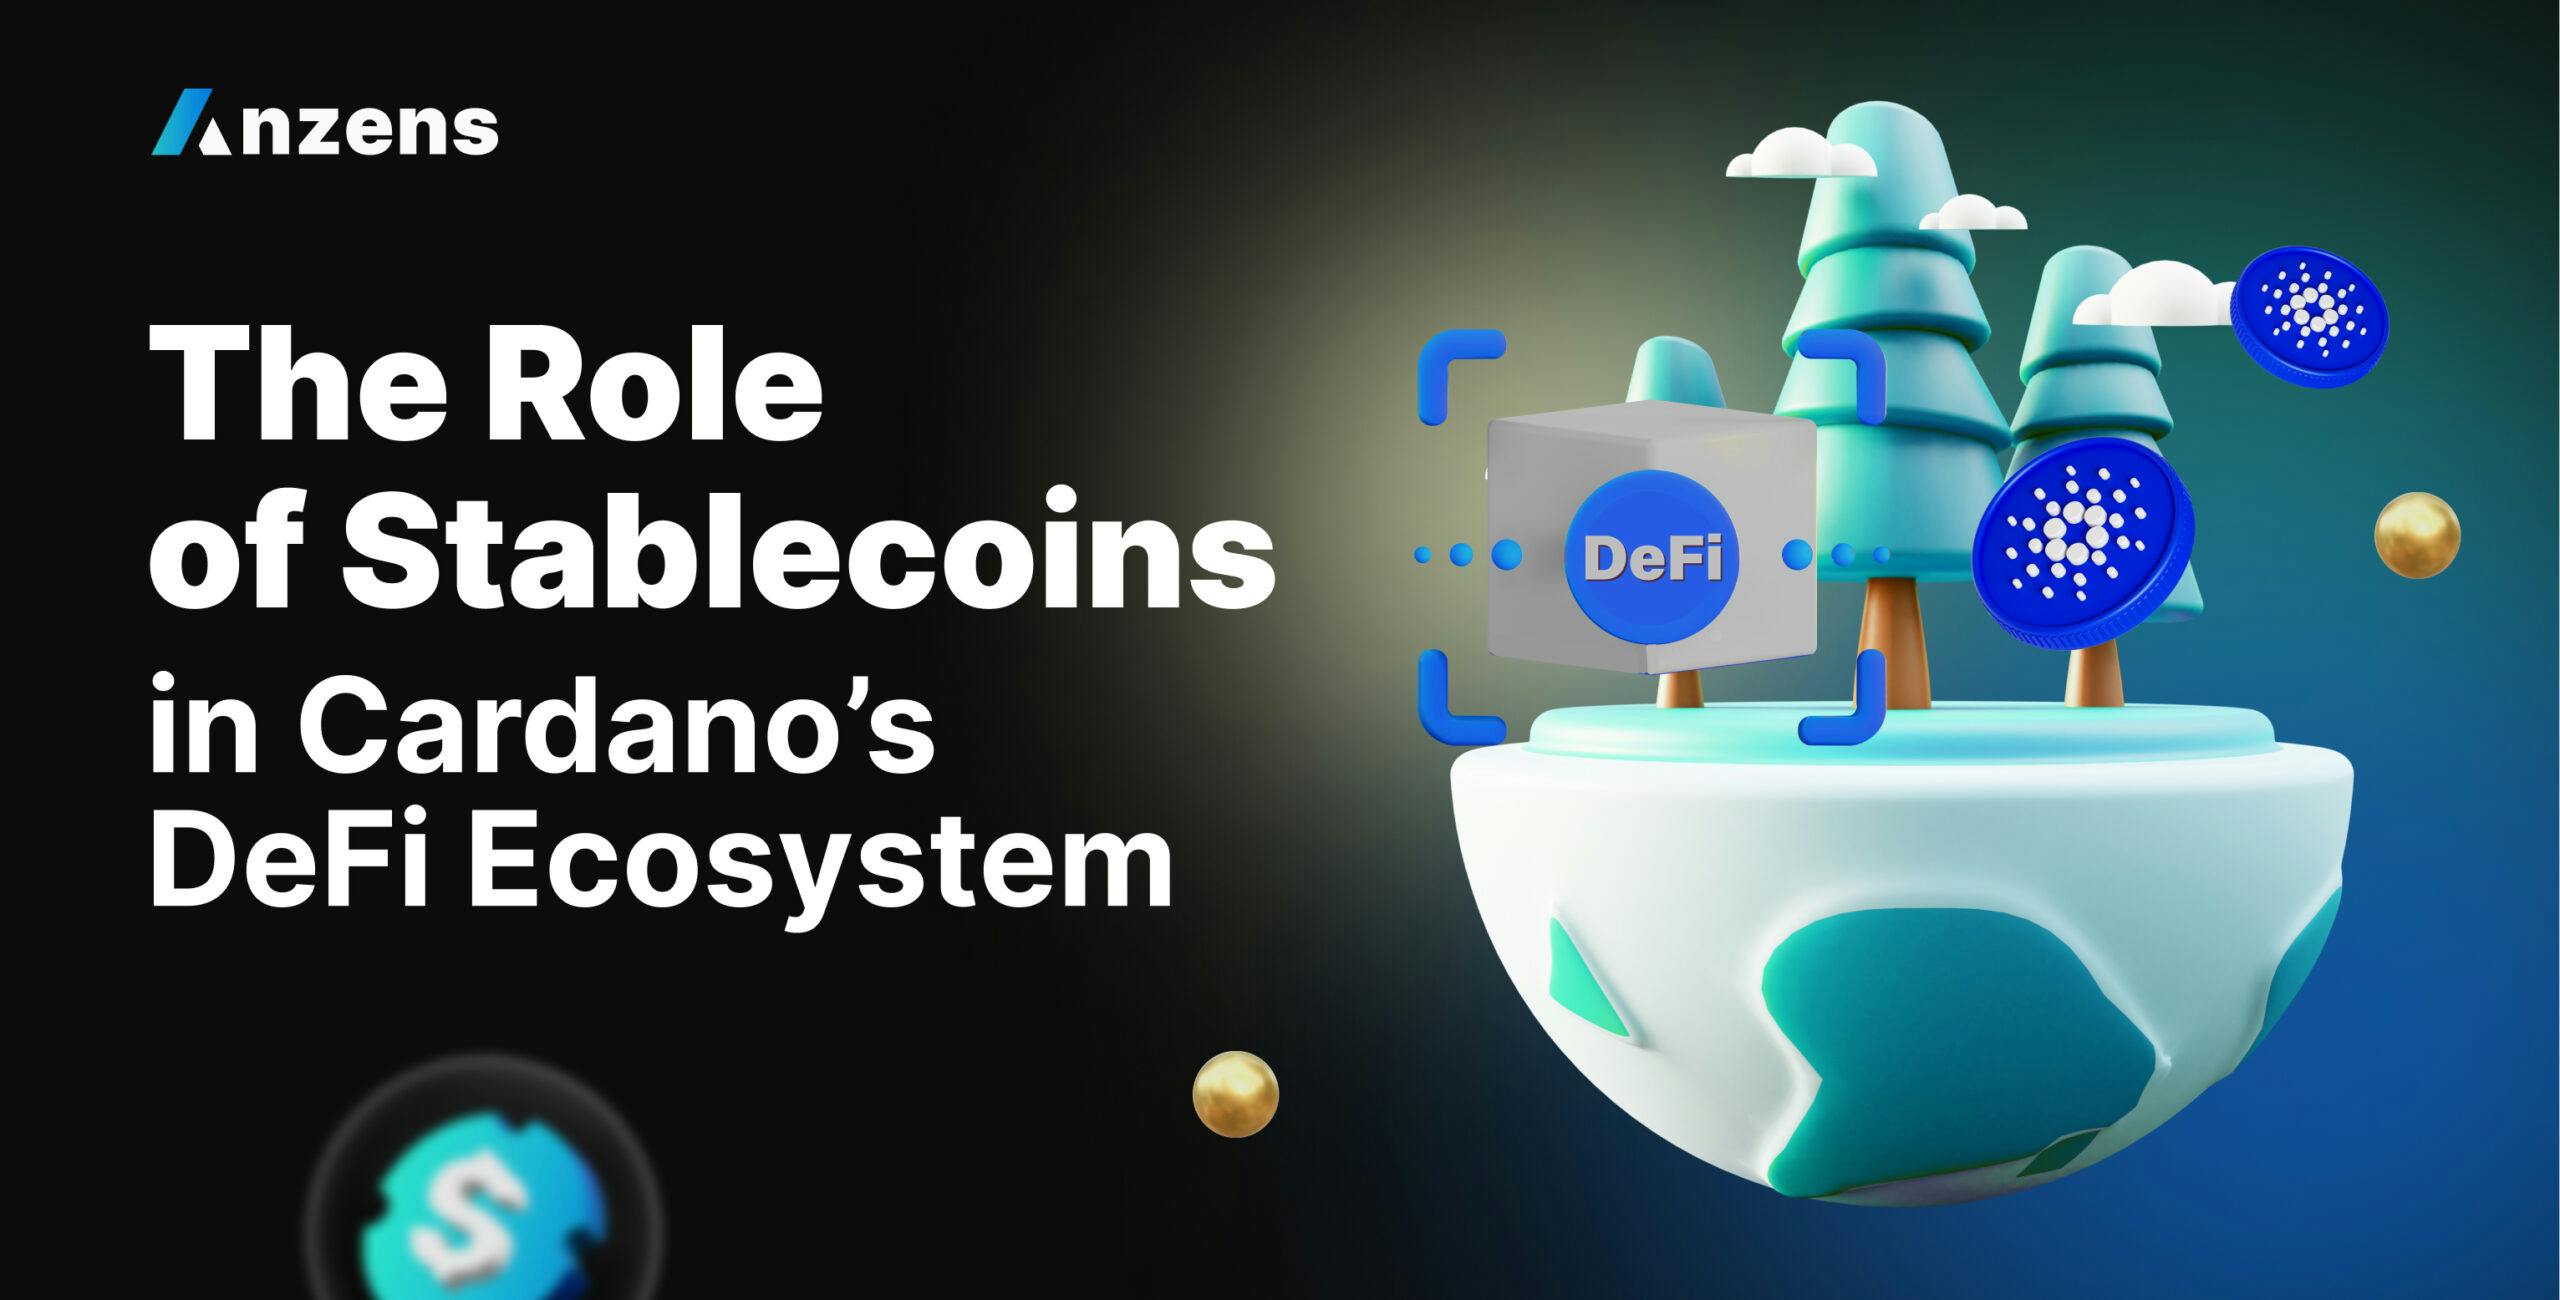 The-Role-of-Stablecoins-in-Cardanos-DeFi-Ecosystem-scaled-1.jpg